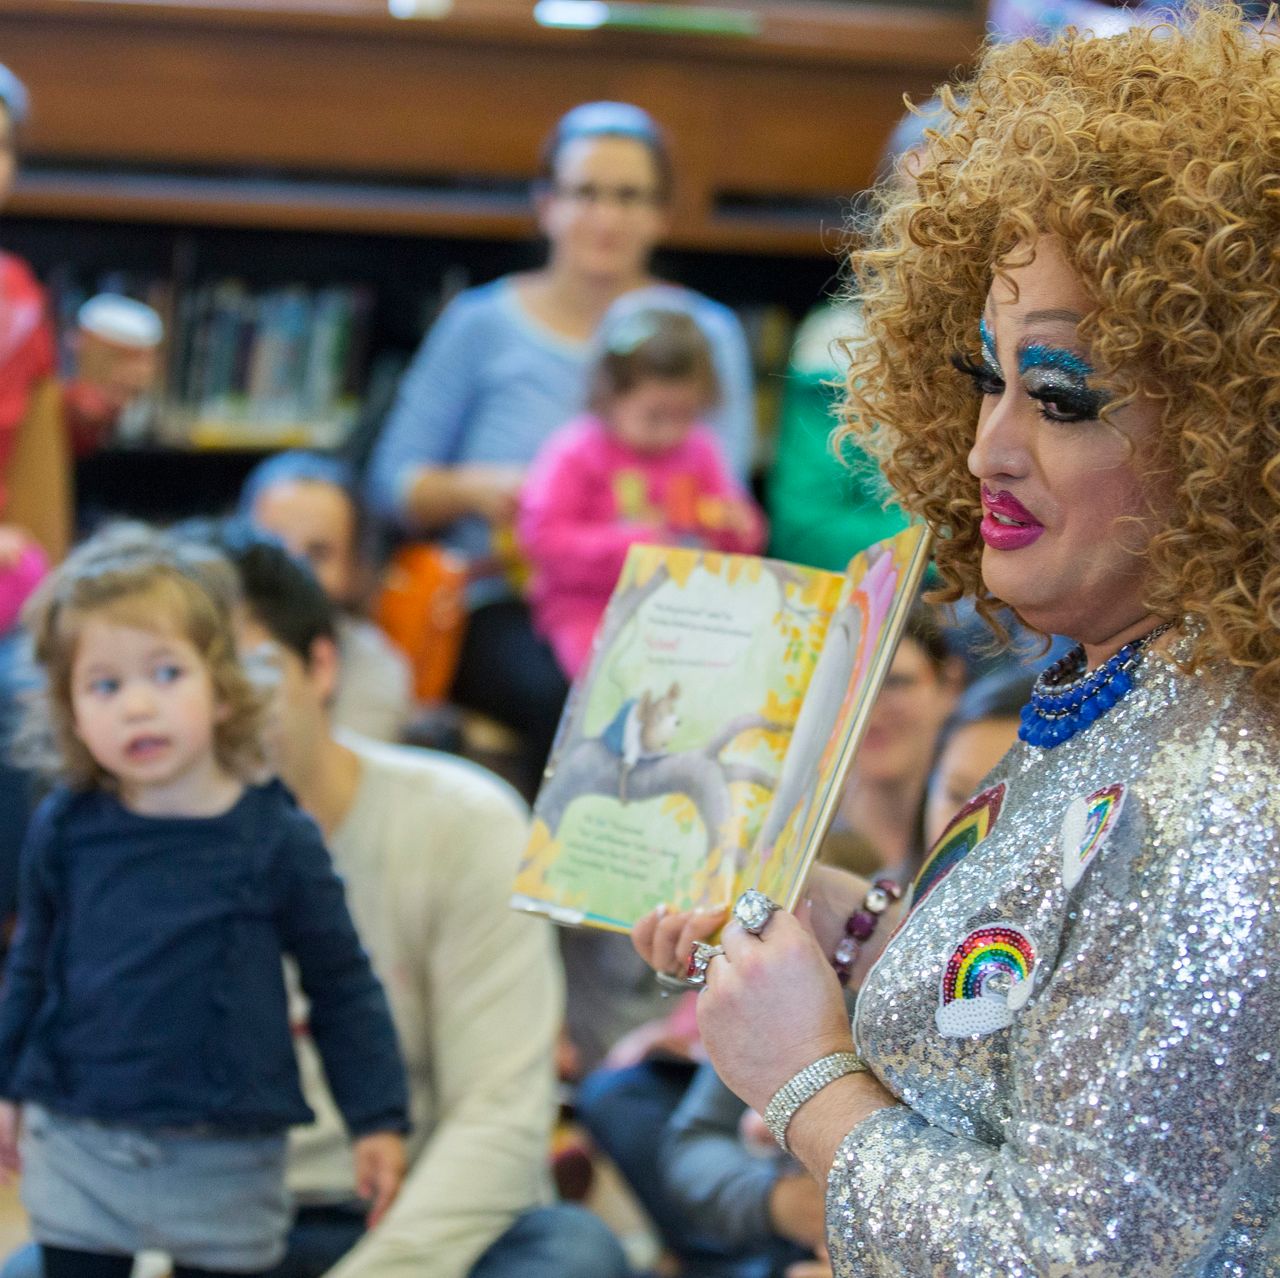 KU daycare cancels Drag Queen Story Hour event